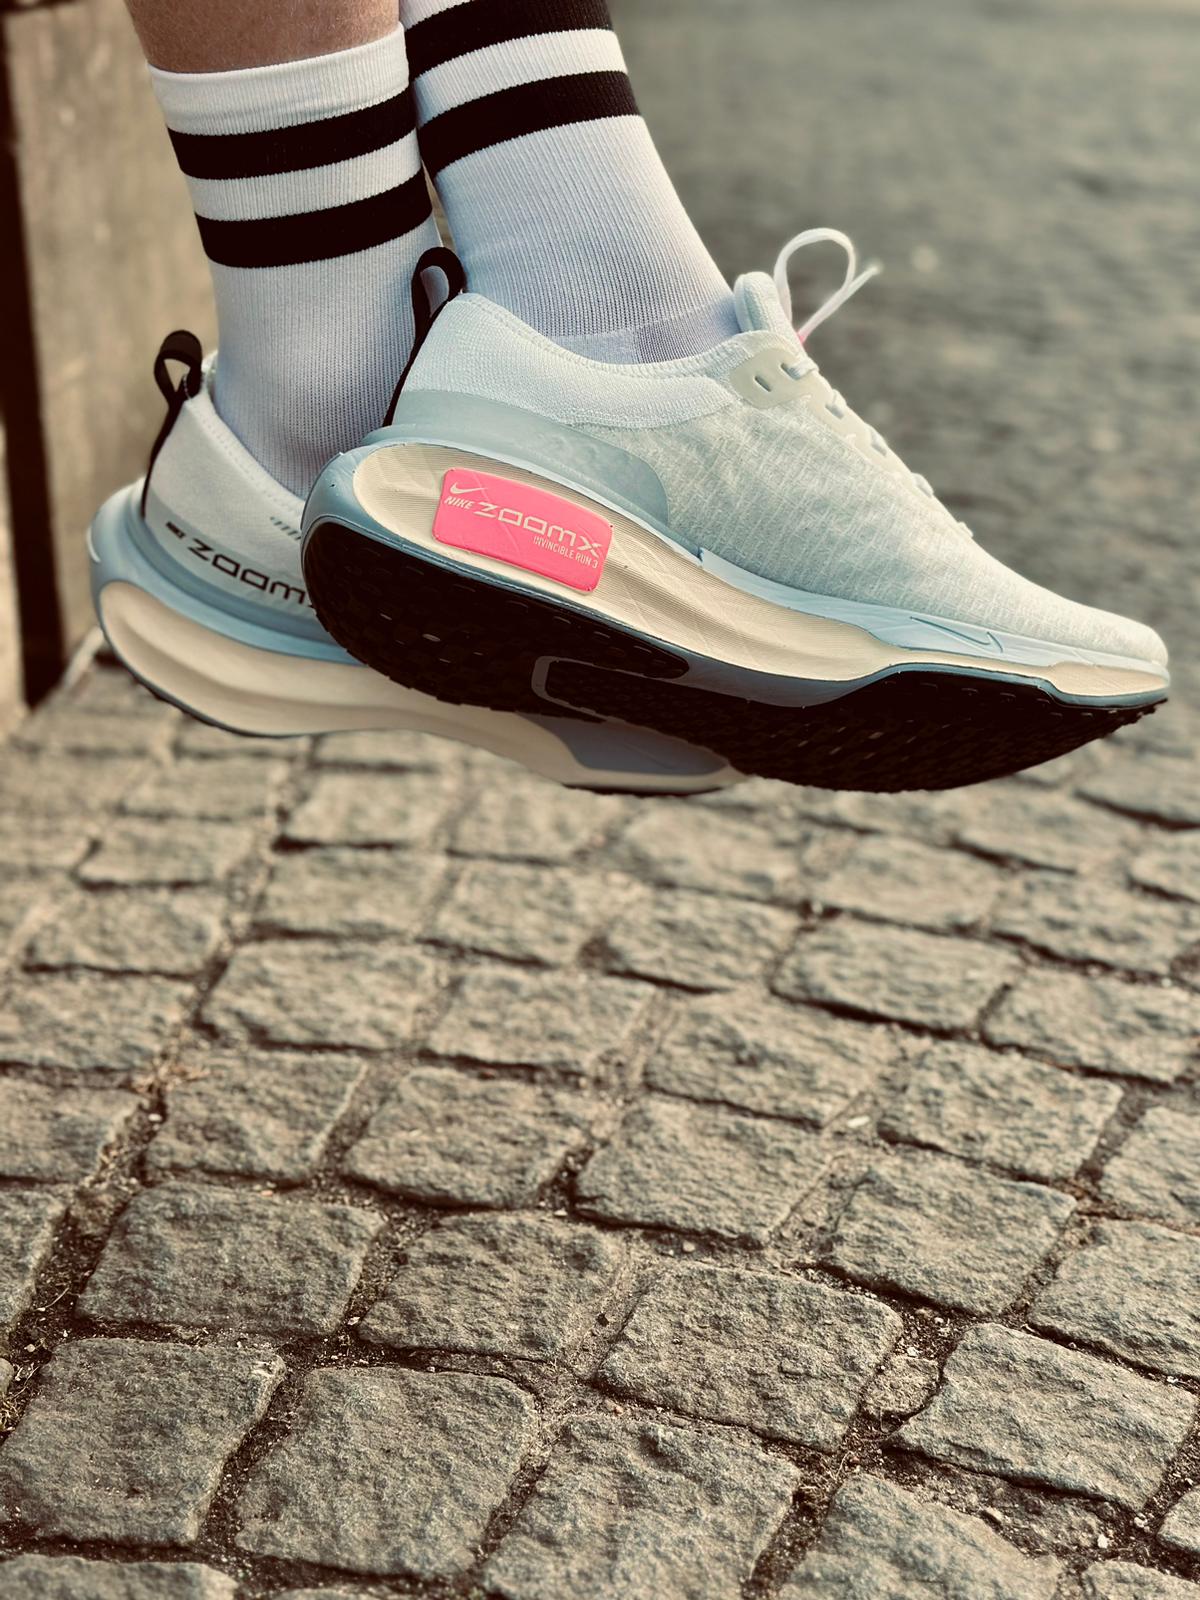 Side view of runner's feet in a pair of white Nike ZoomX Invincible 3 running against a cobbled street background